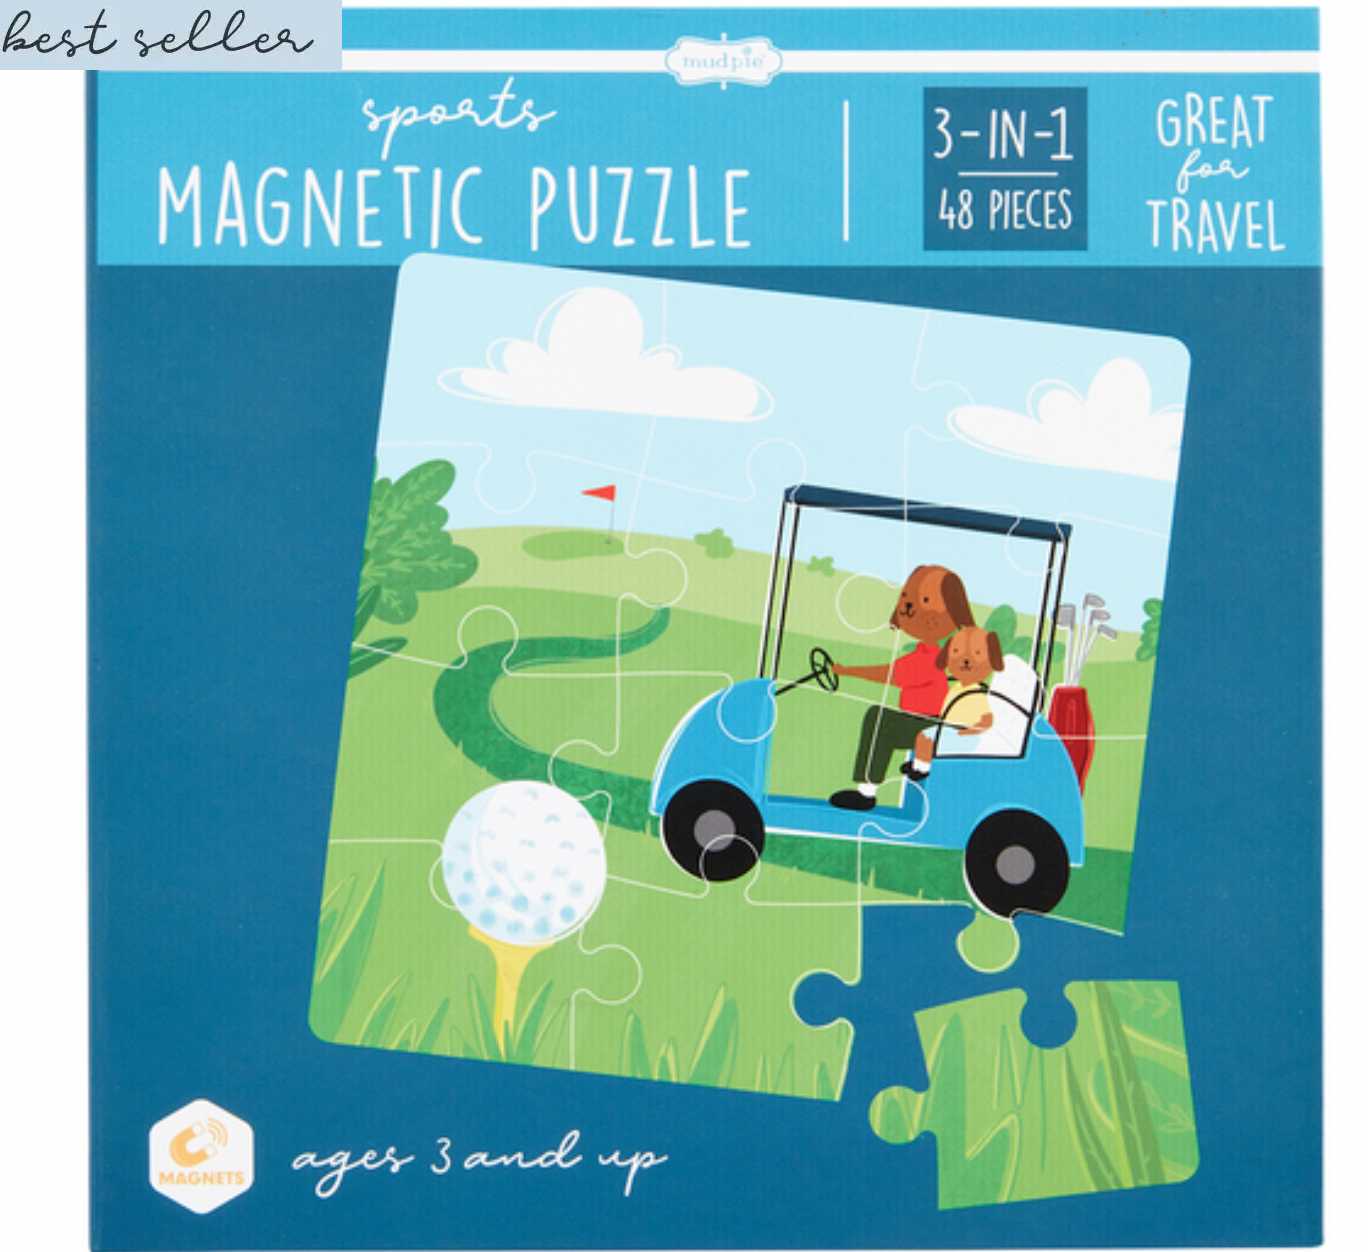 Magnetic Puzzles